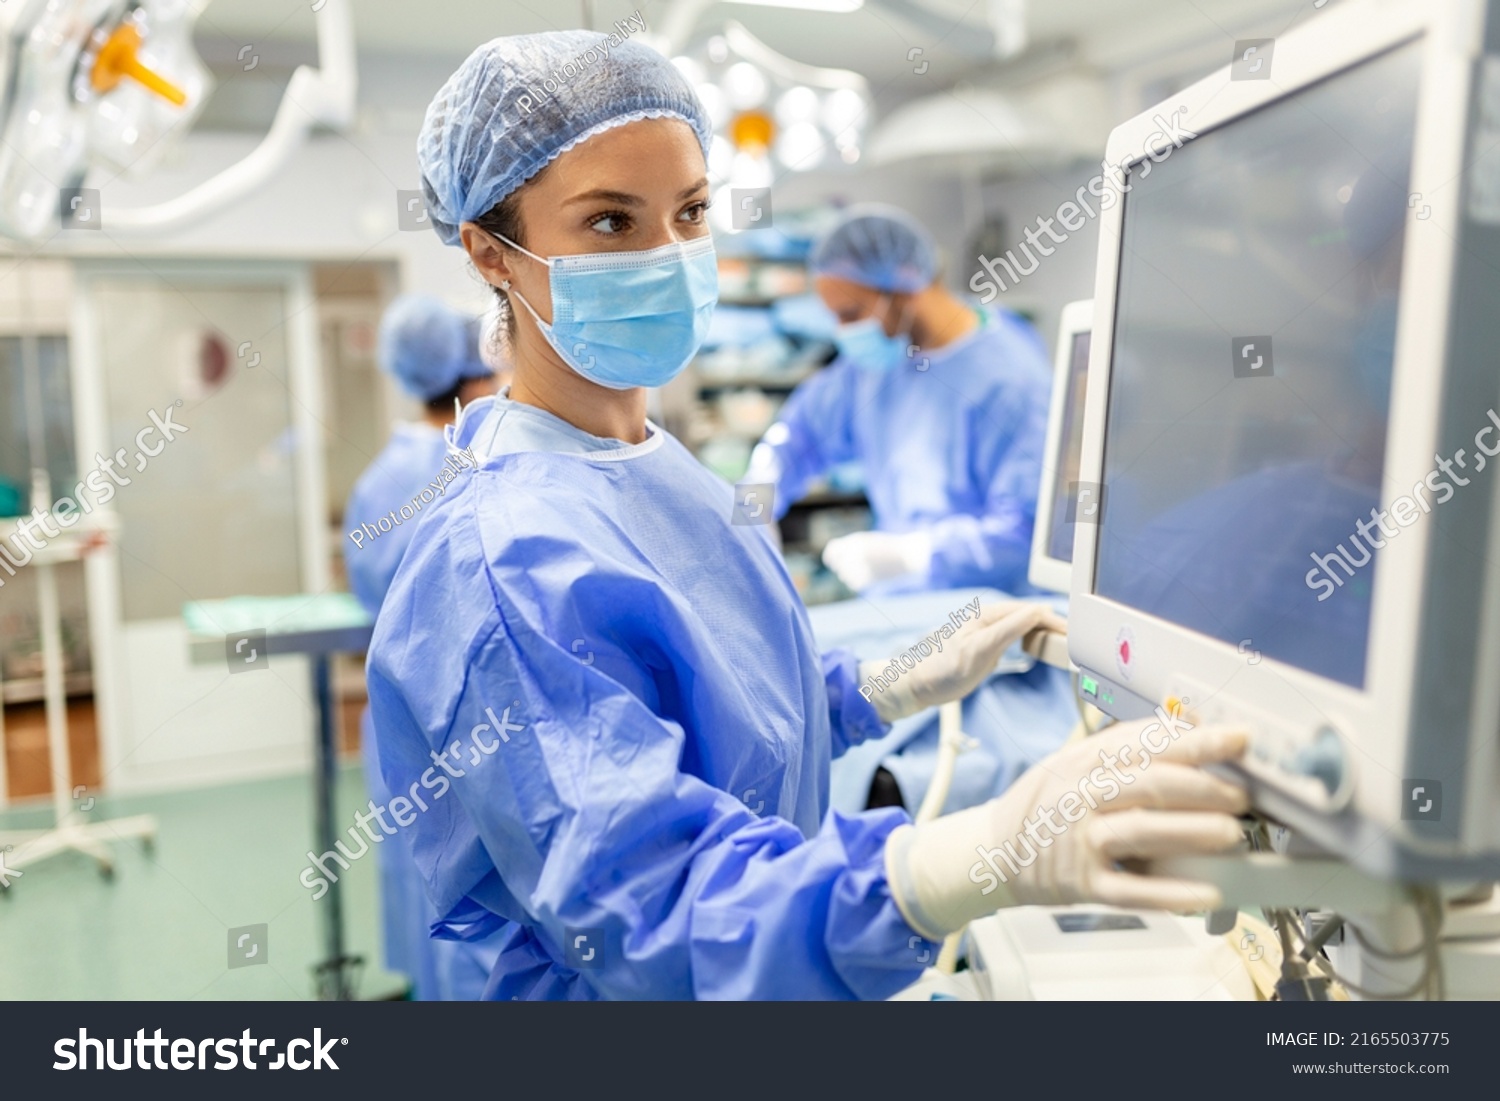 Anesthetist Working In Operating Theatre Wearing Protecive Gear checking monitors while sedating patient before surgical procedure in hospital #2165503775